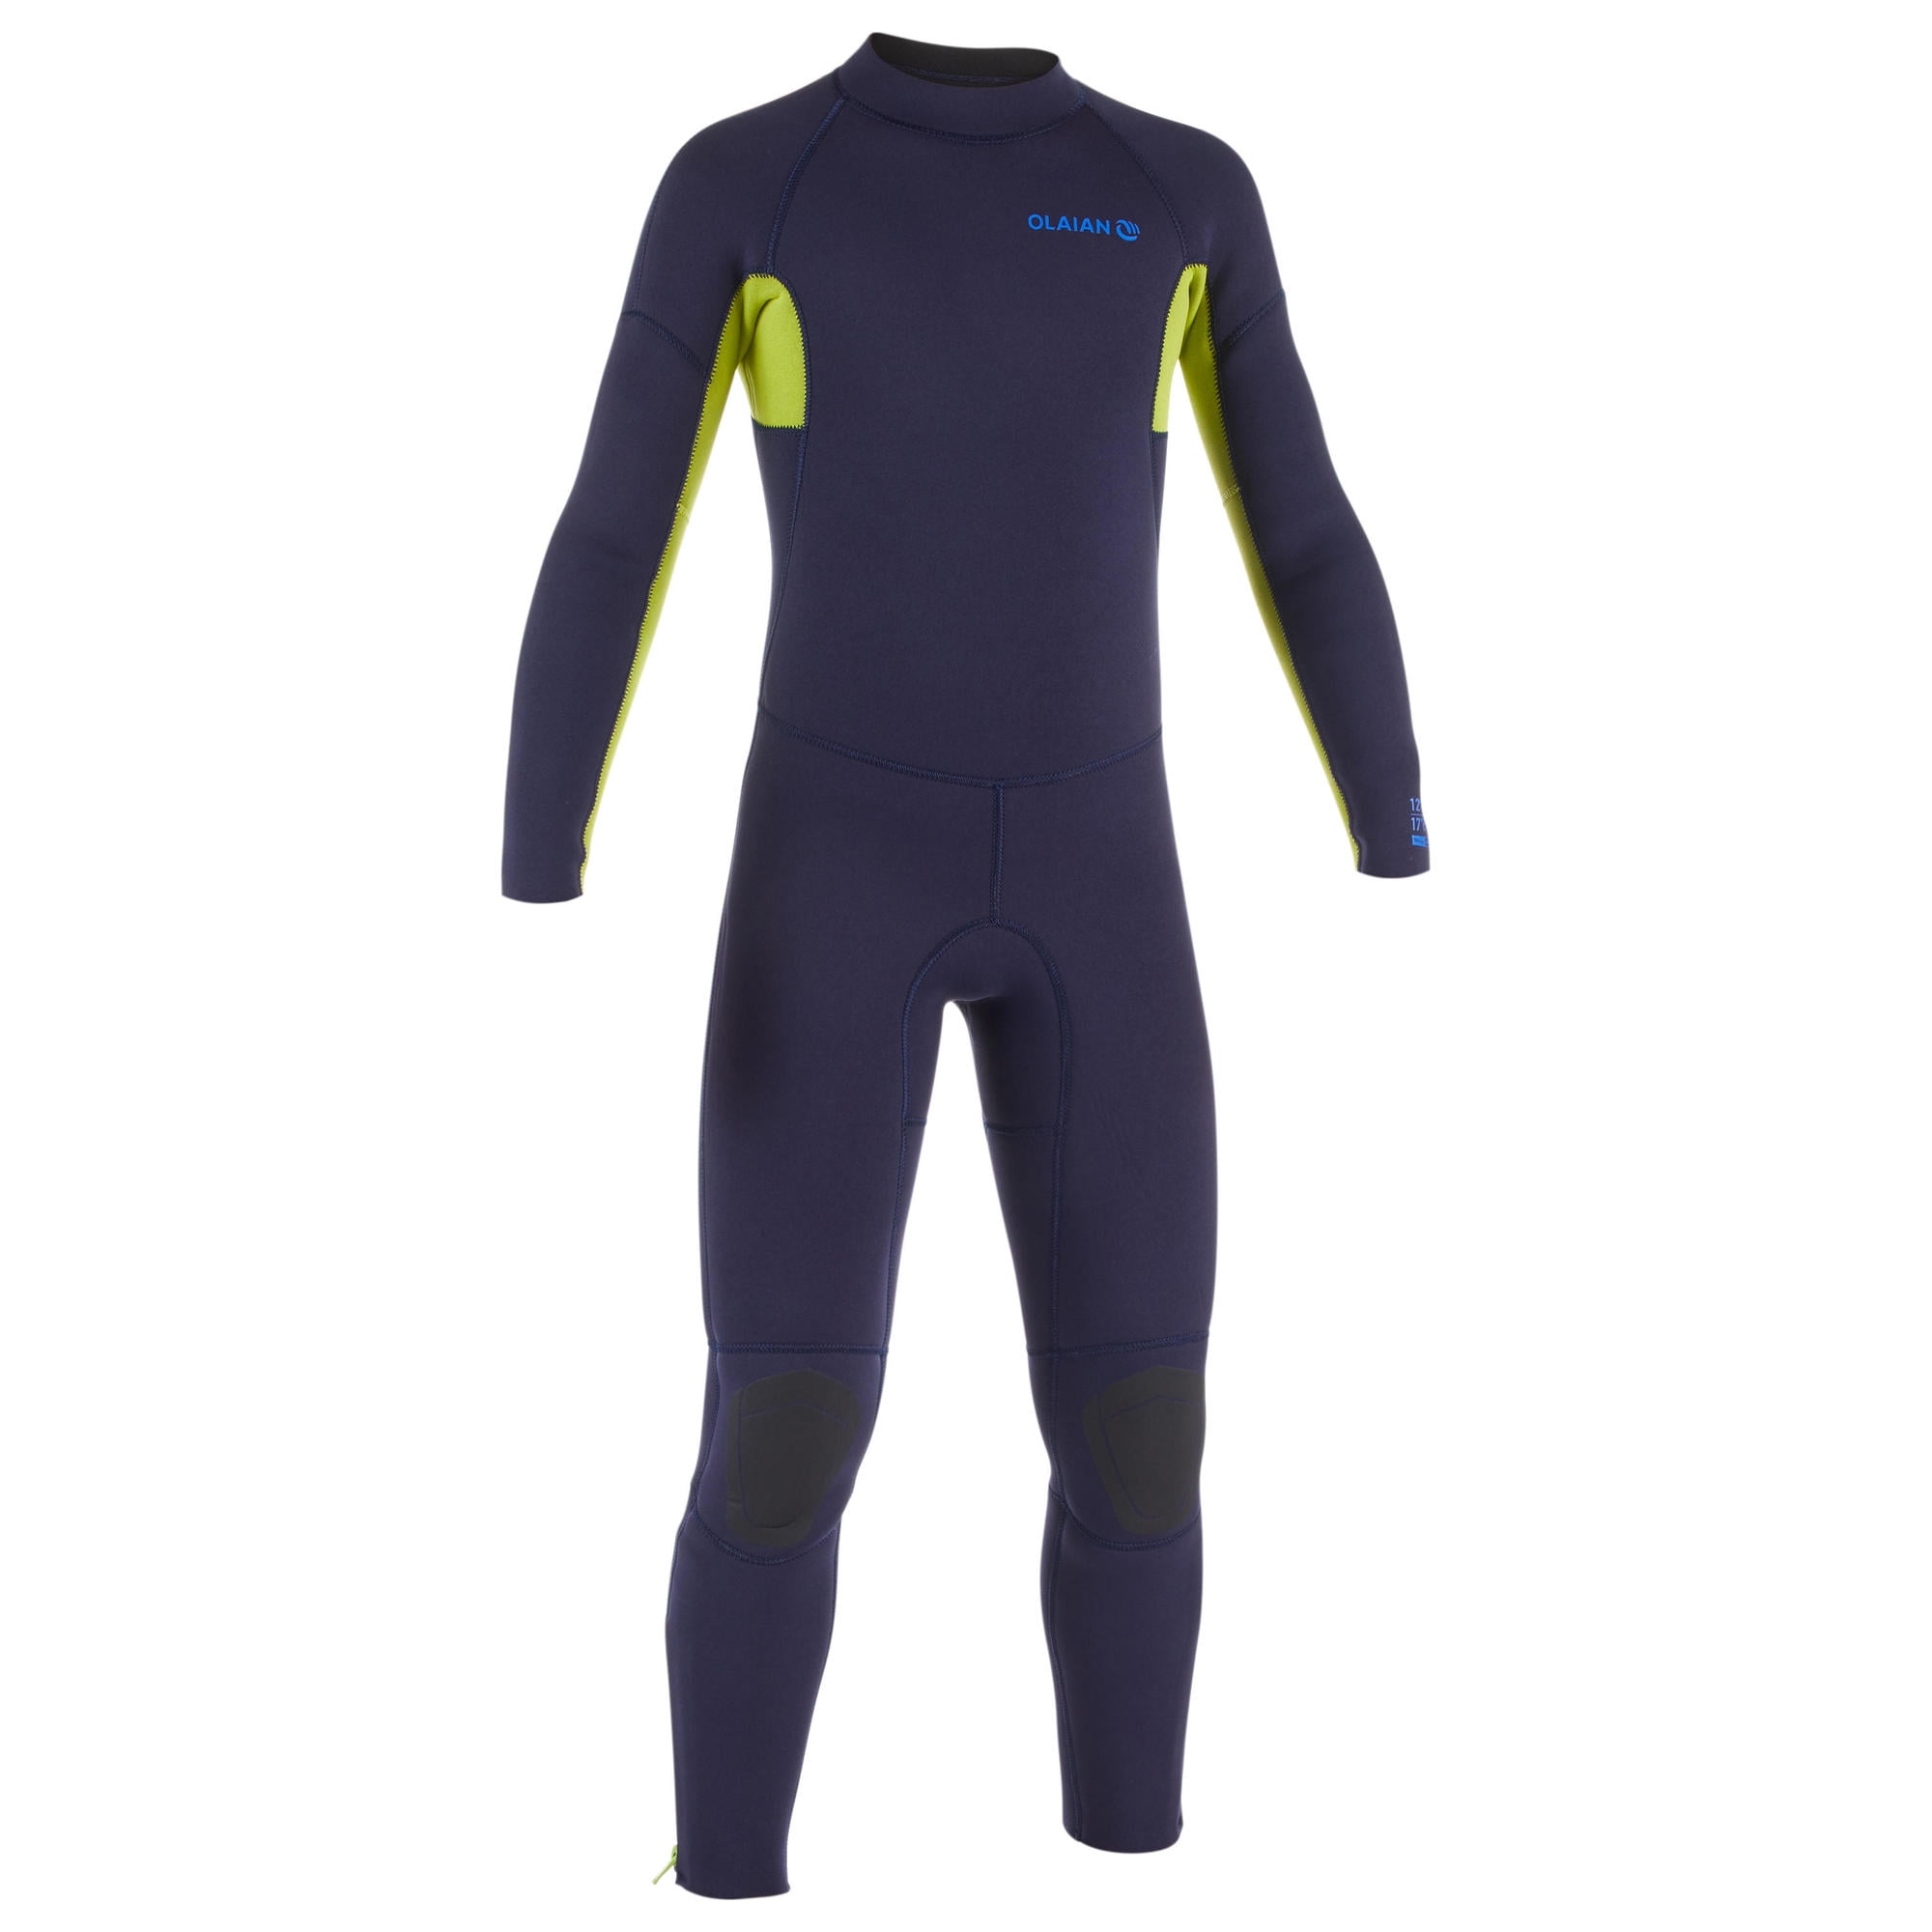 Easy Stretch Thermal Lining Gul Response Kids Youth Junior 5/4MM Winter Cold Weather Chest Zip Wetsuit Black Lime Unisex 